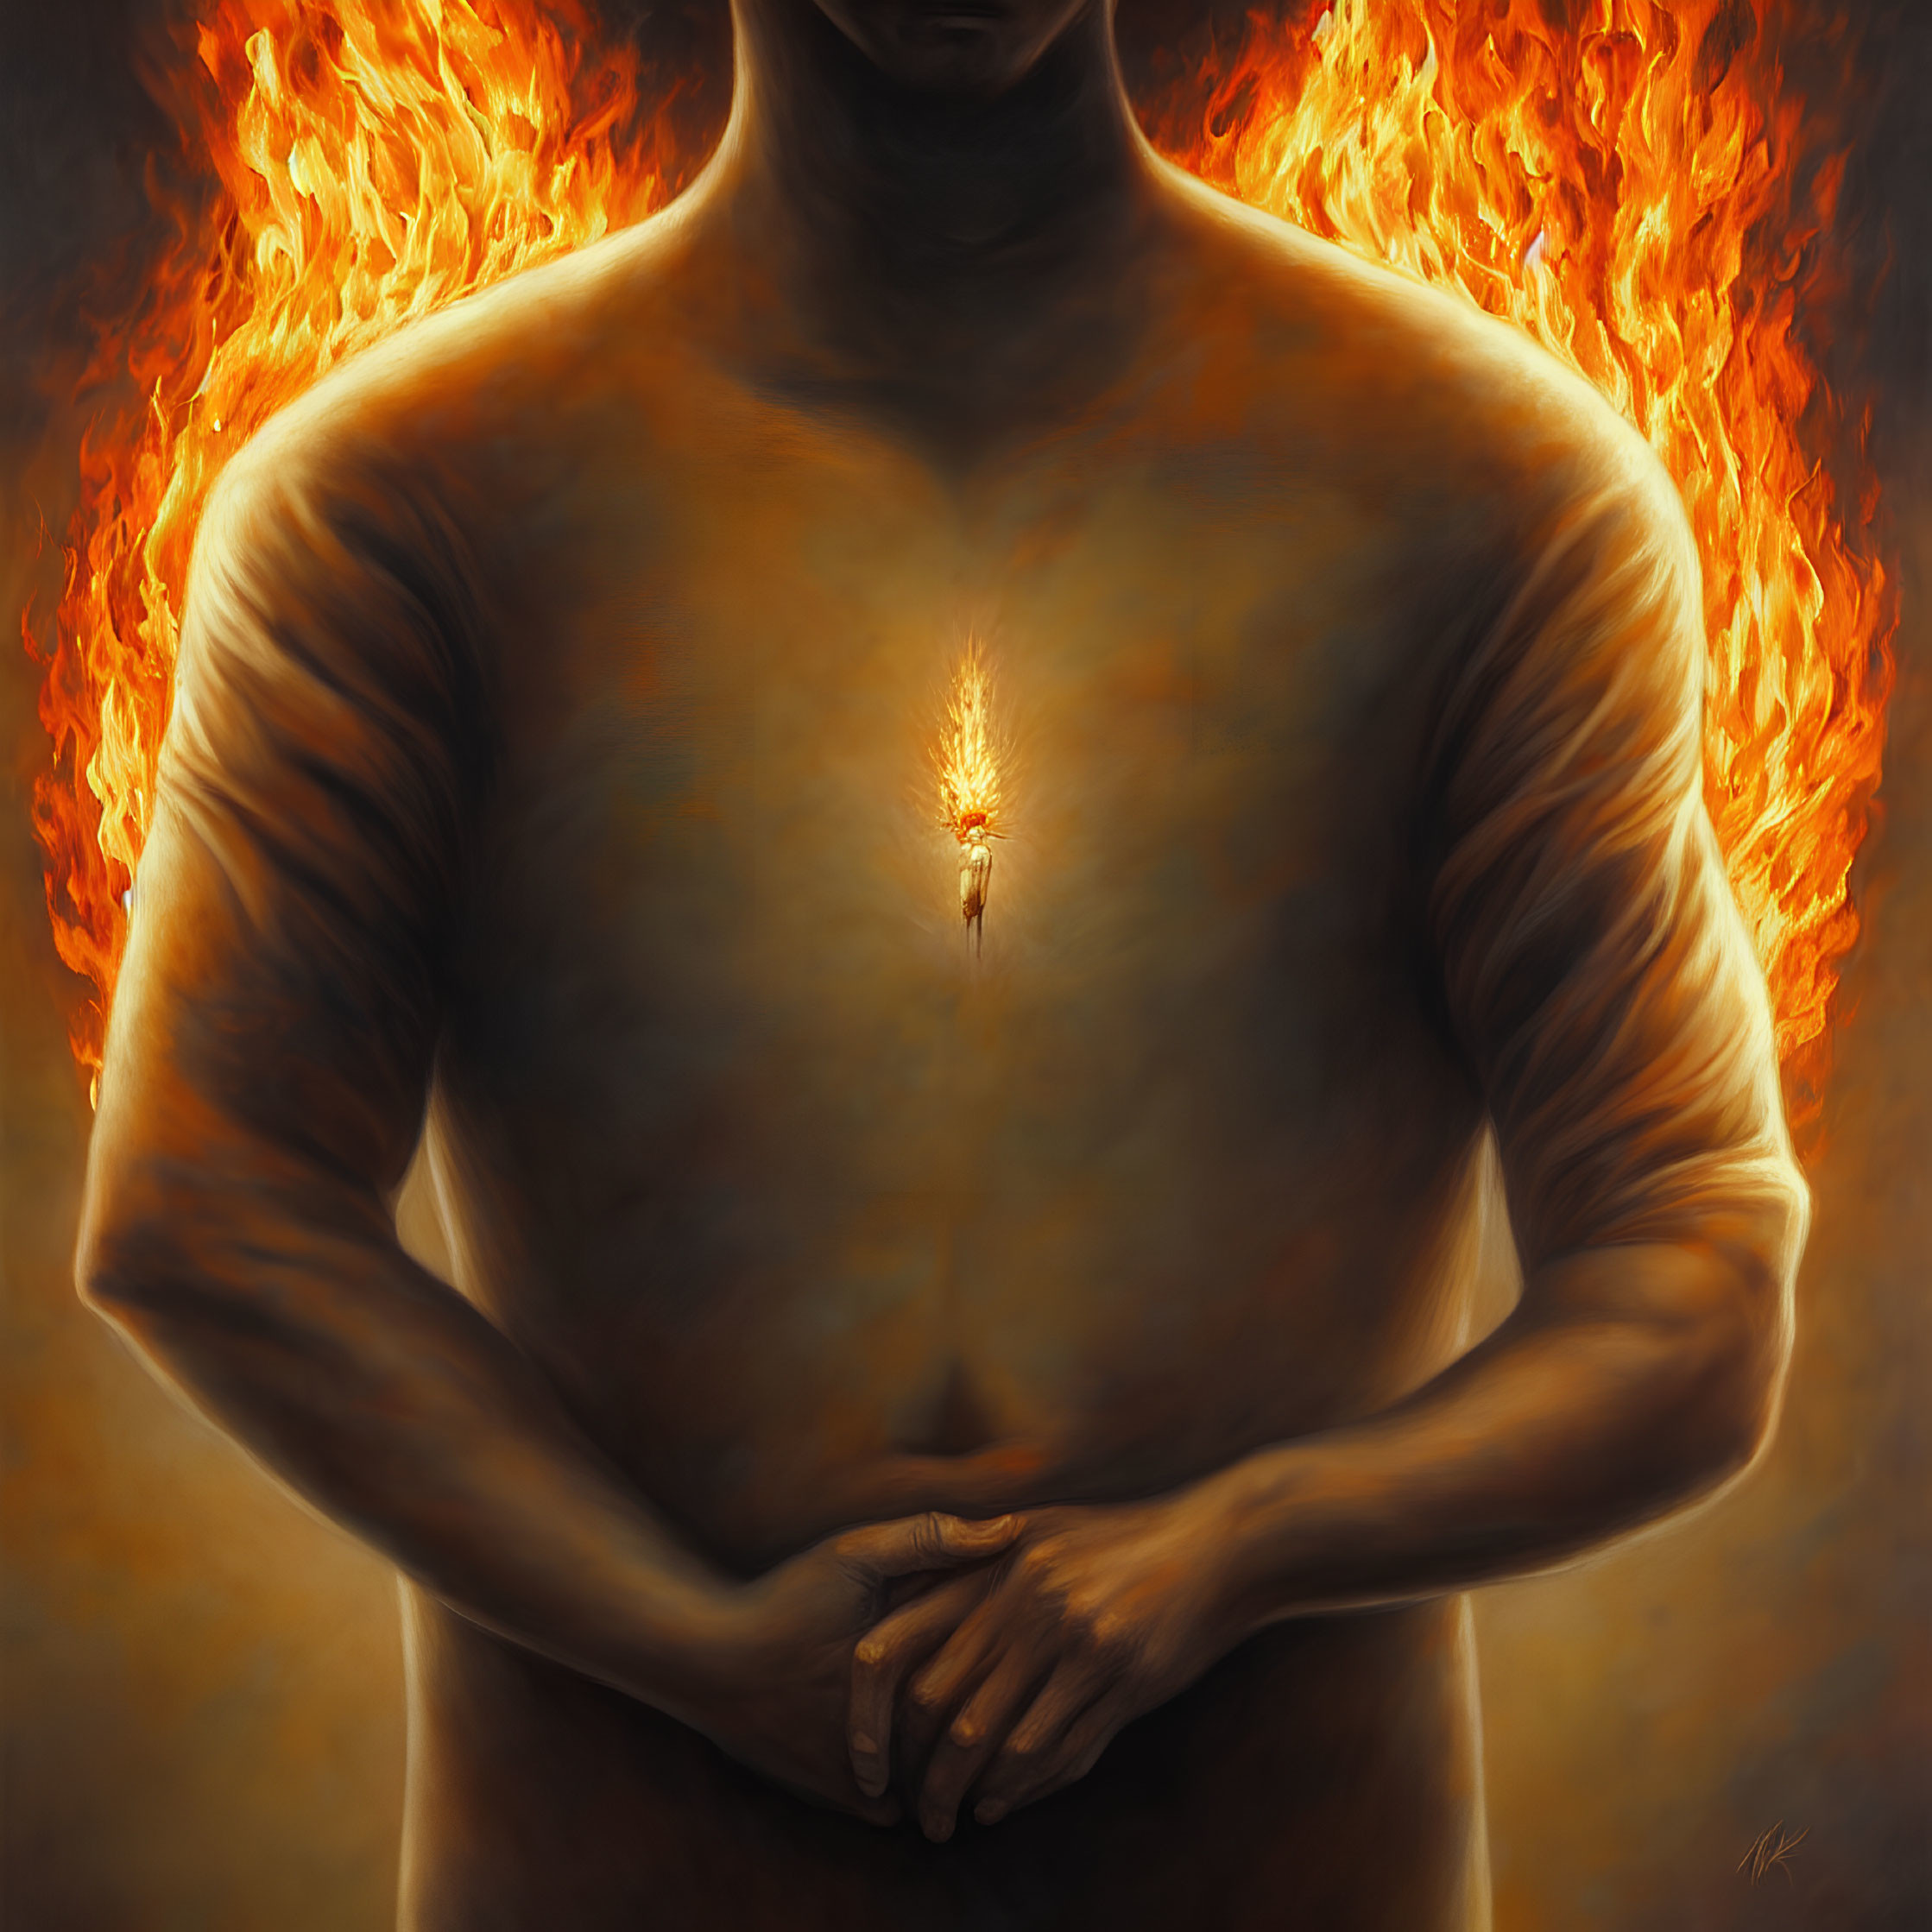 Shirtless man with flames and fire symbolizing inner strength